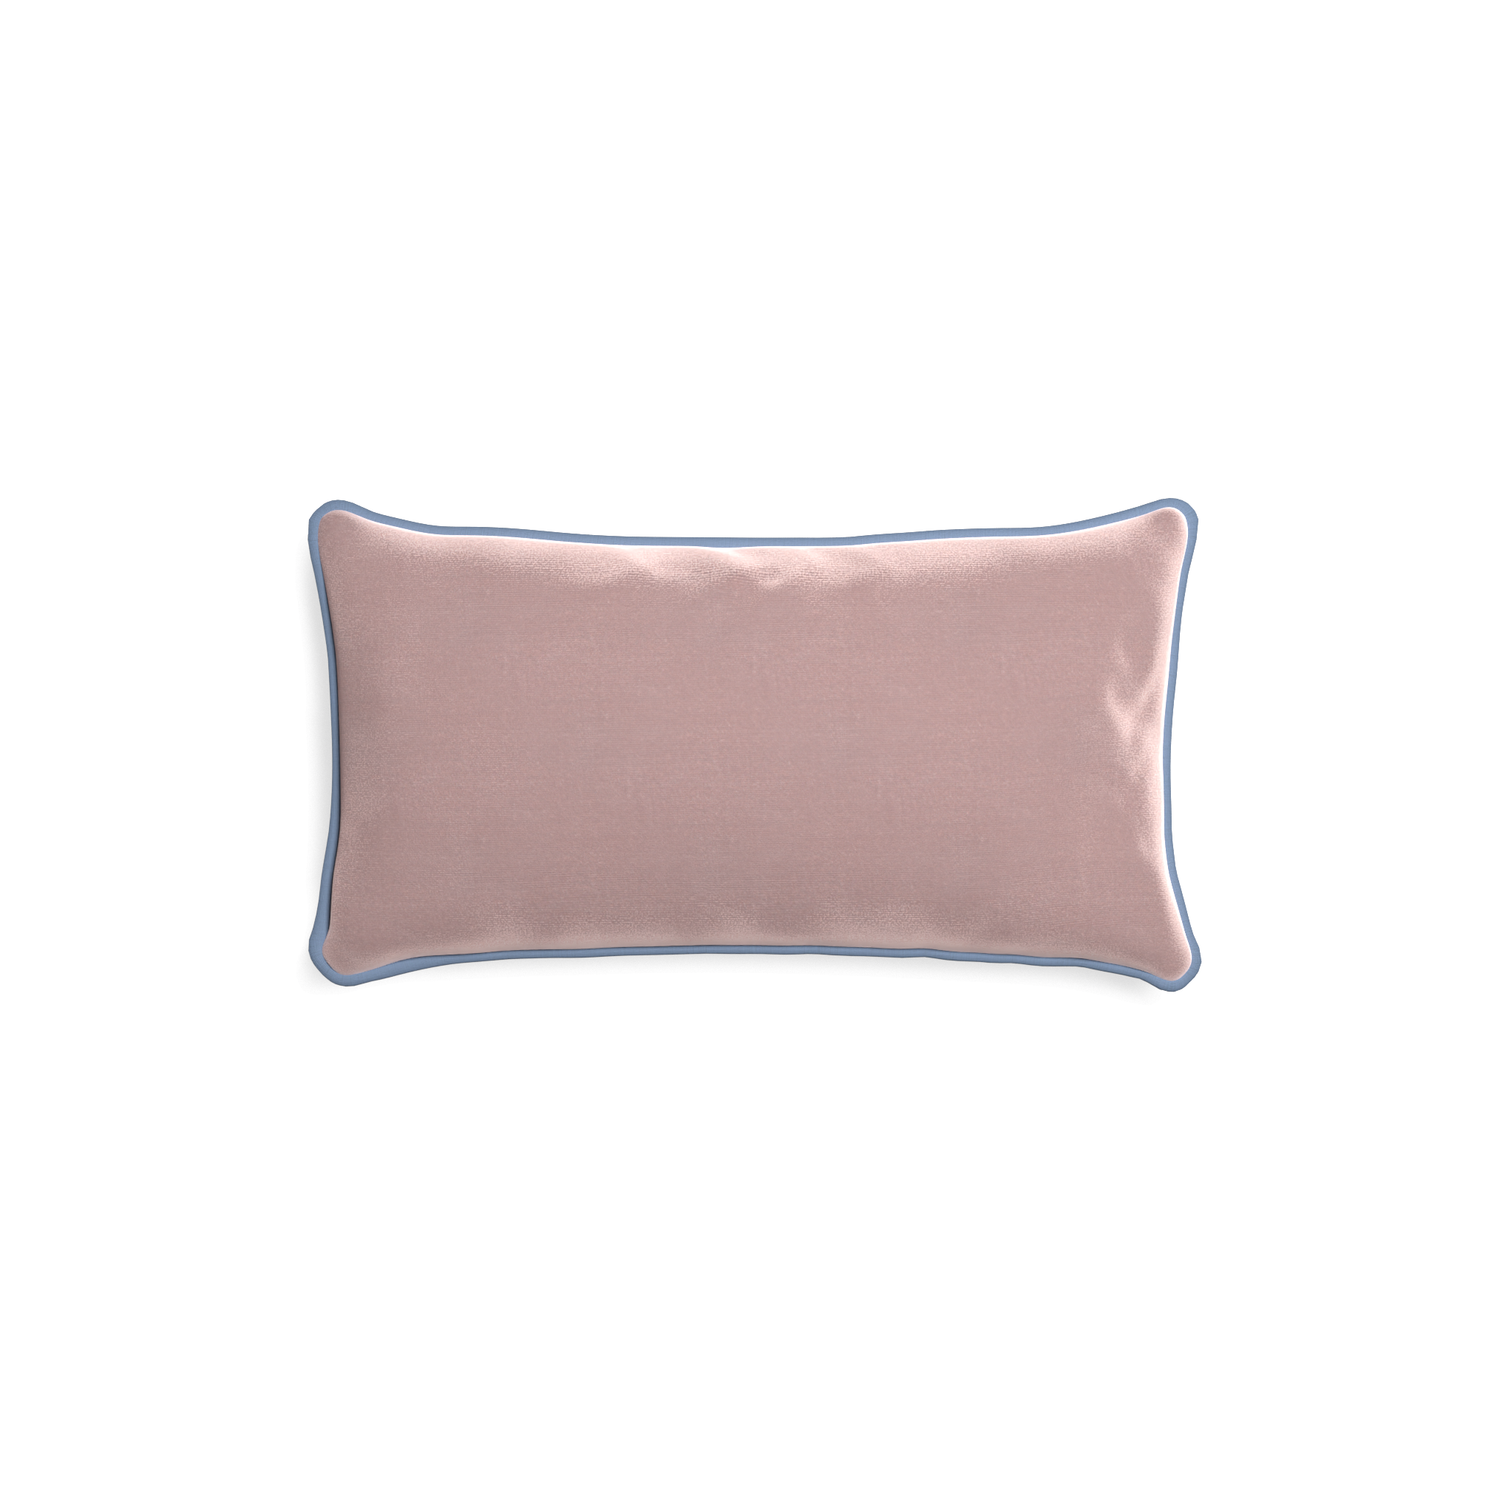 rectangle mauve velvet pillow with sky blue piping